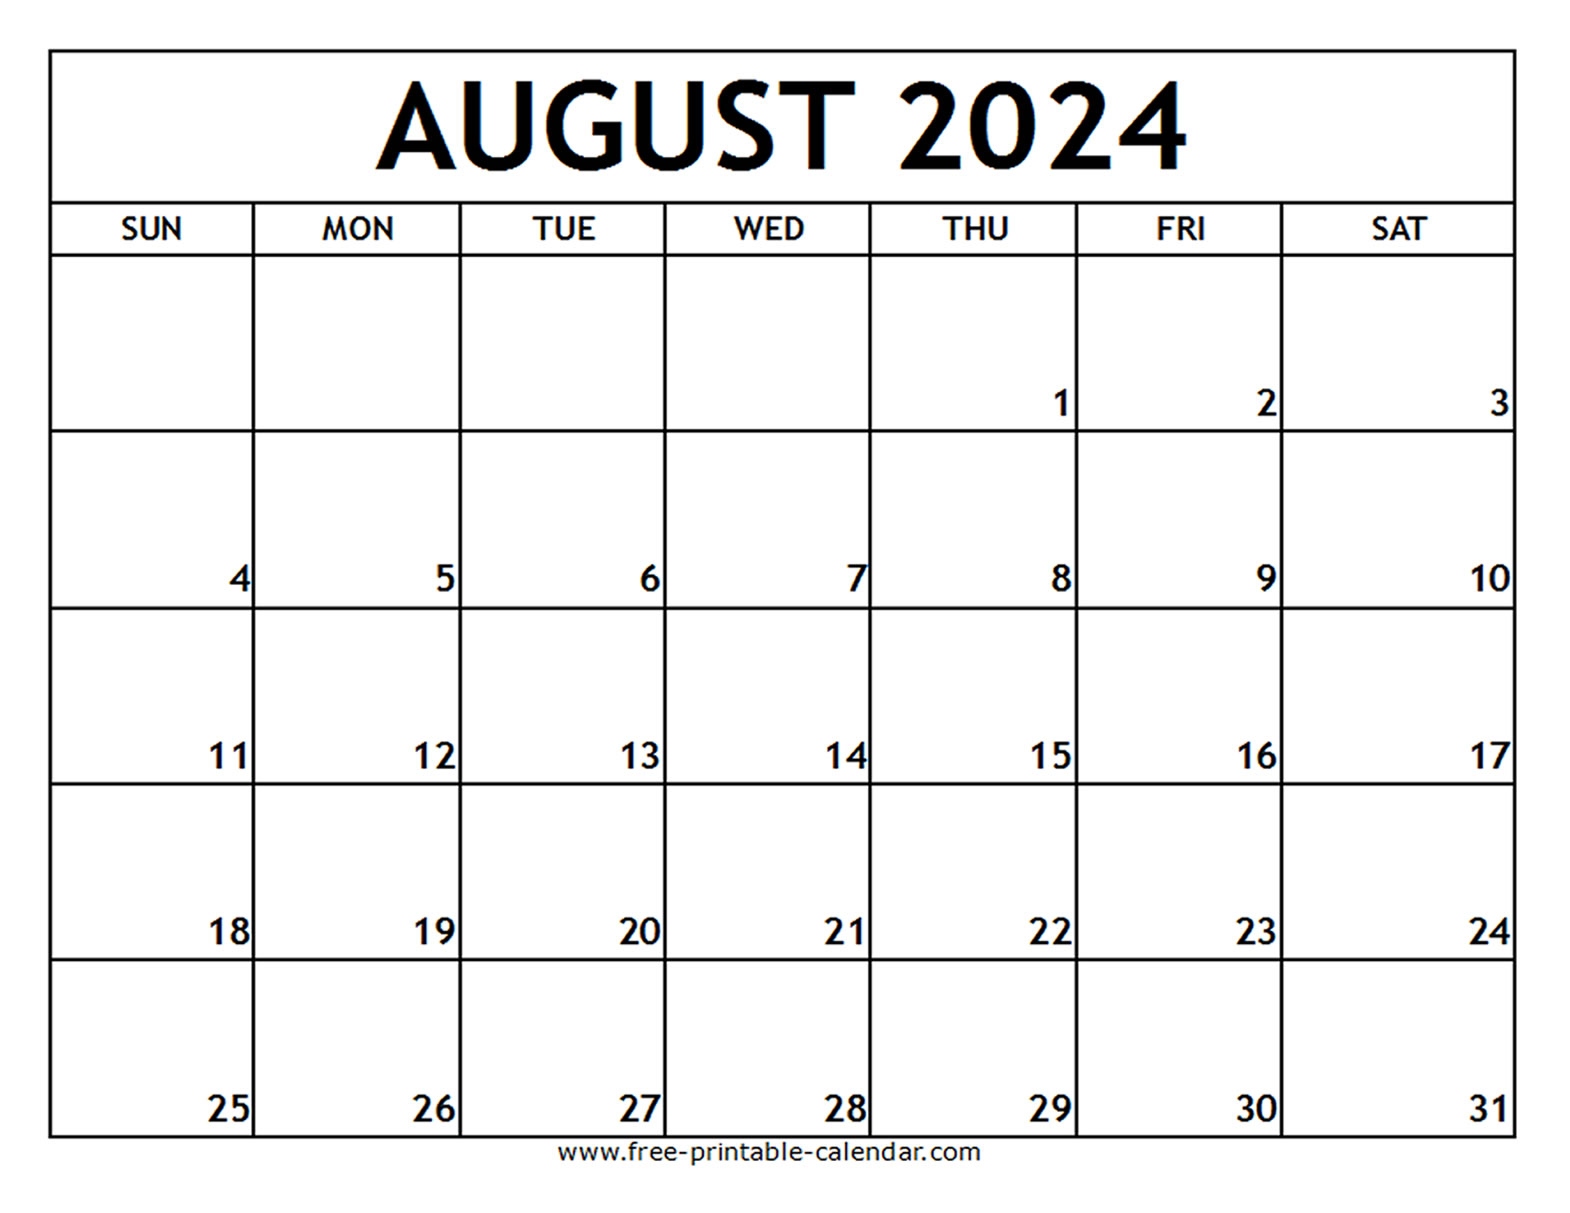 August 2024 Printable Calendar - Free-Printable-Calendar with regard to Free Printable August 2024 Calendar With Notes